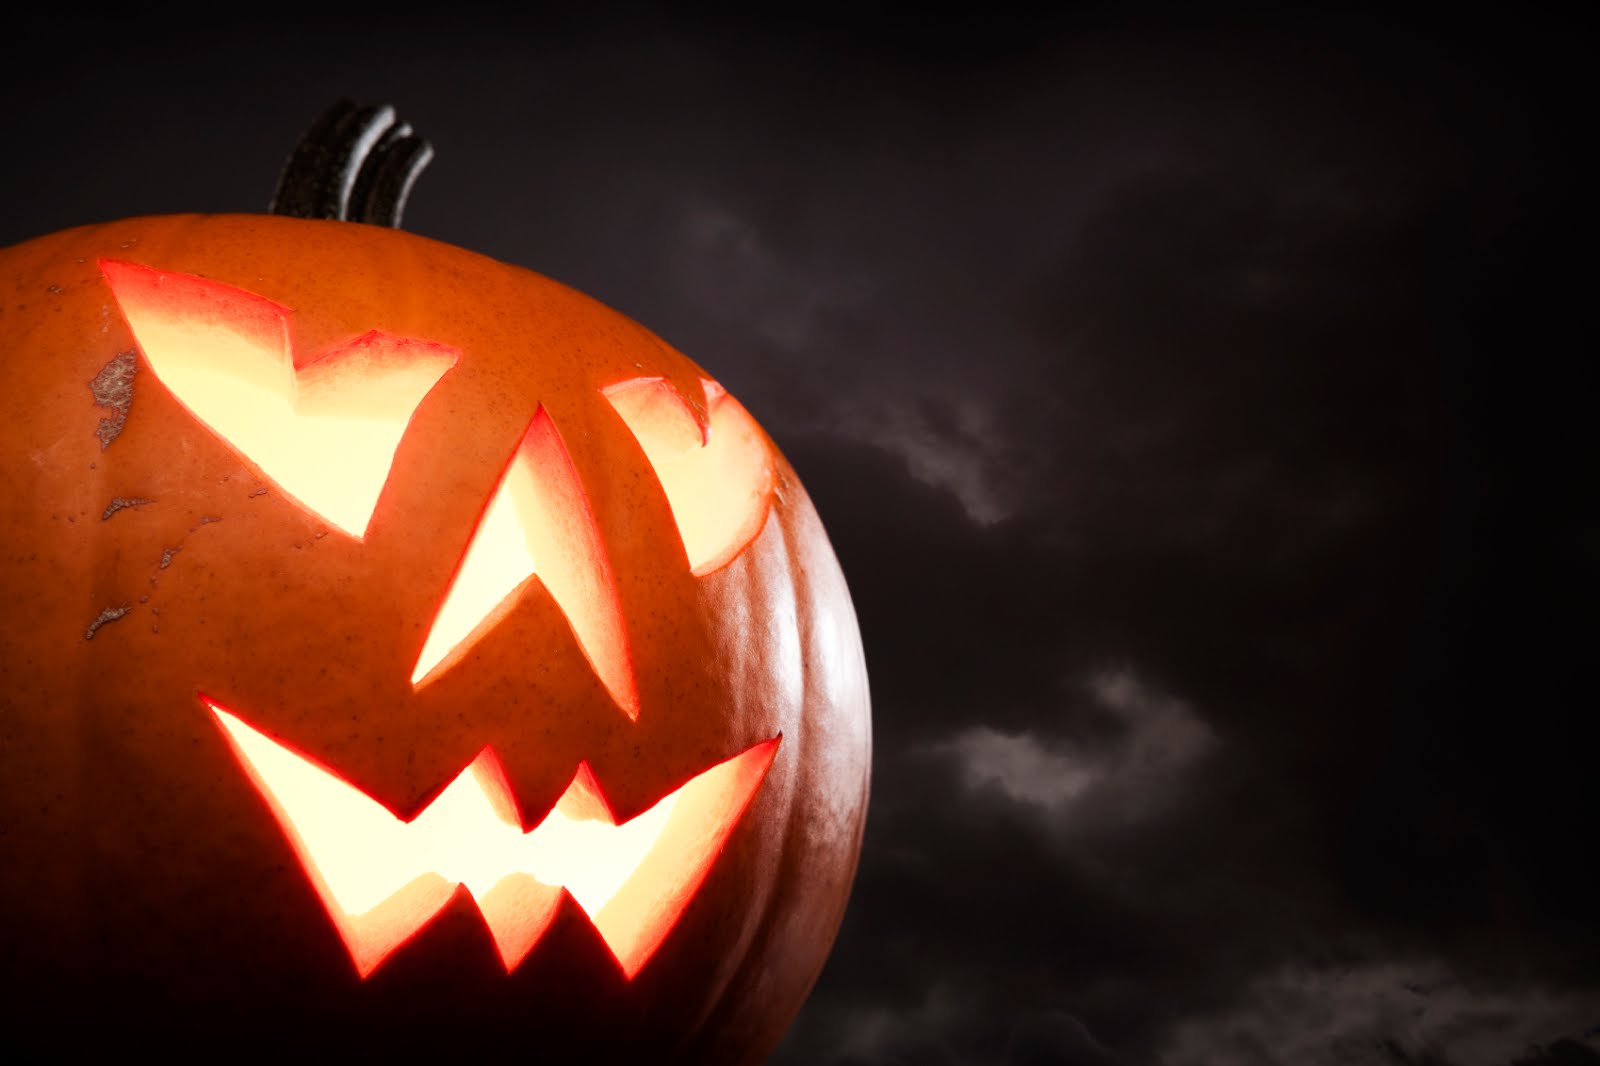 10 Halloween Safety Tips For Kids